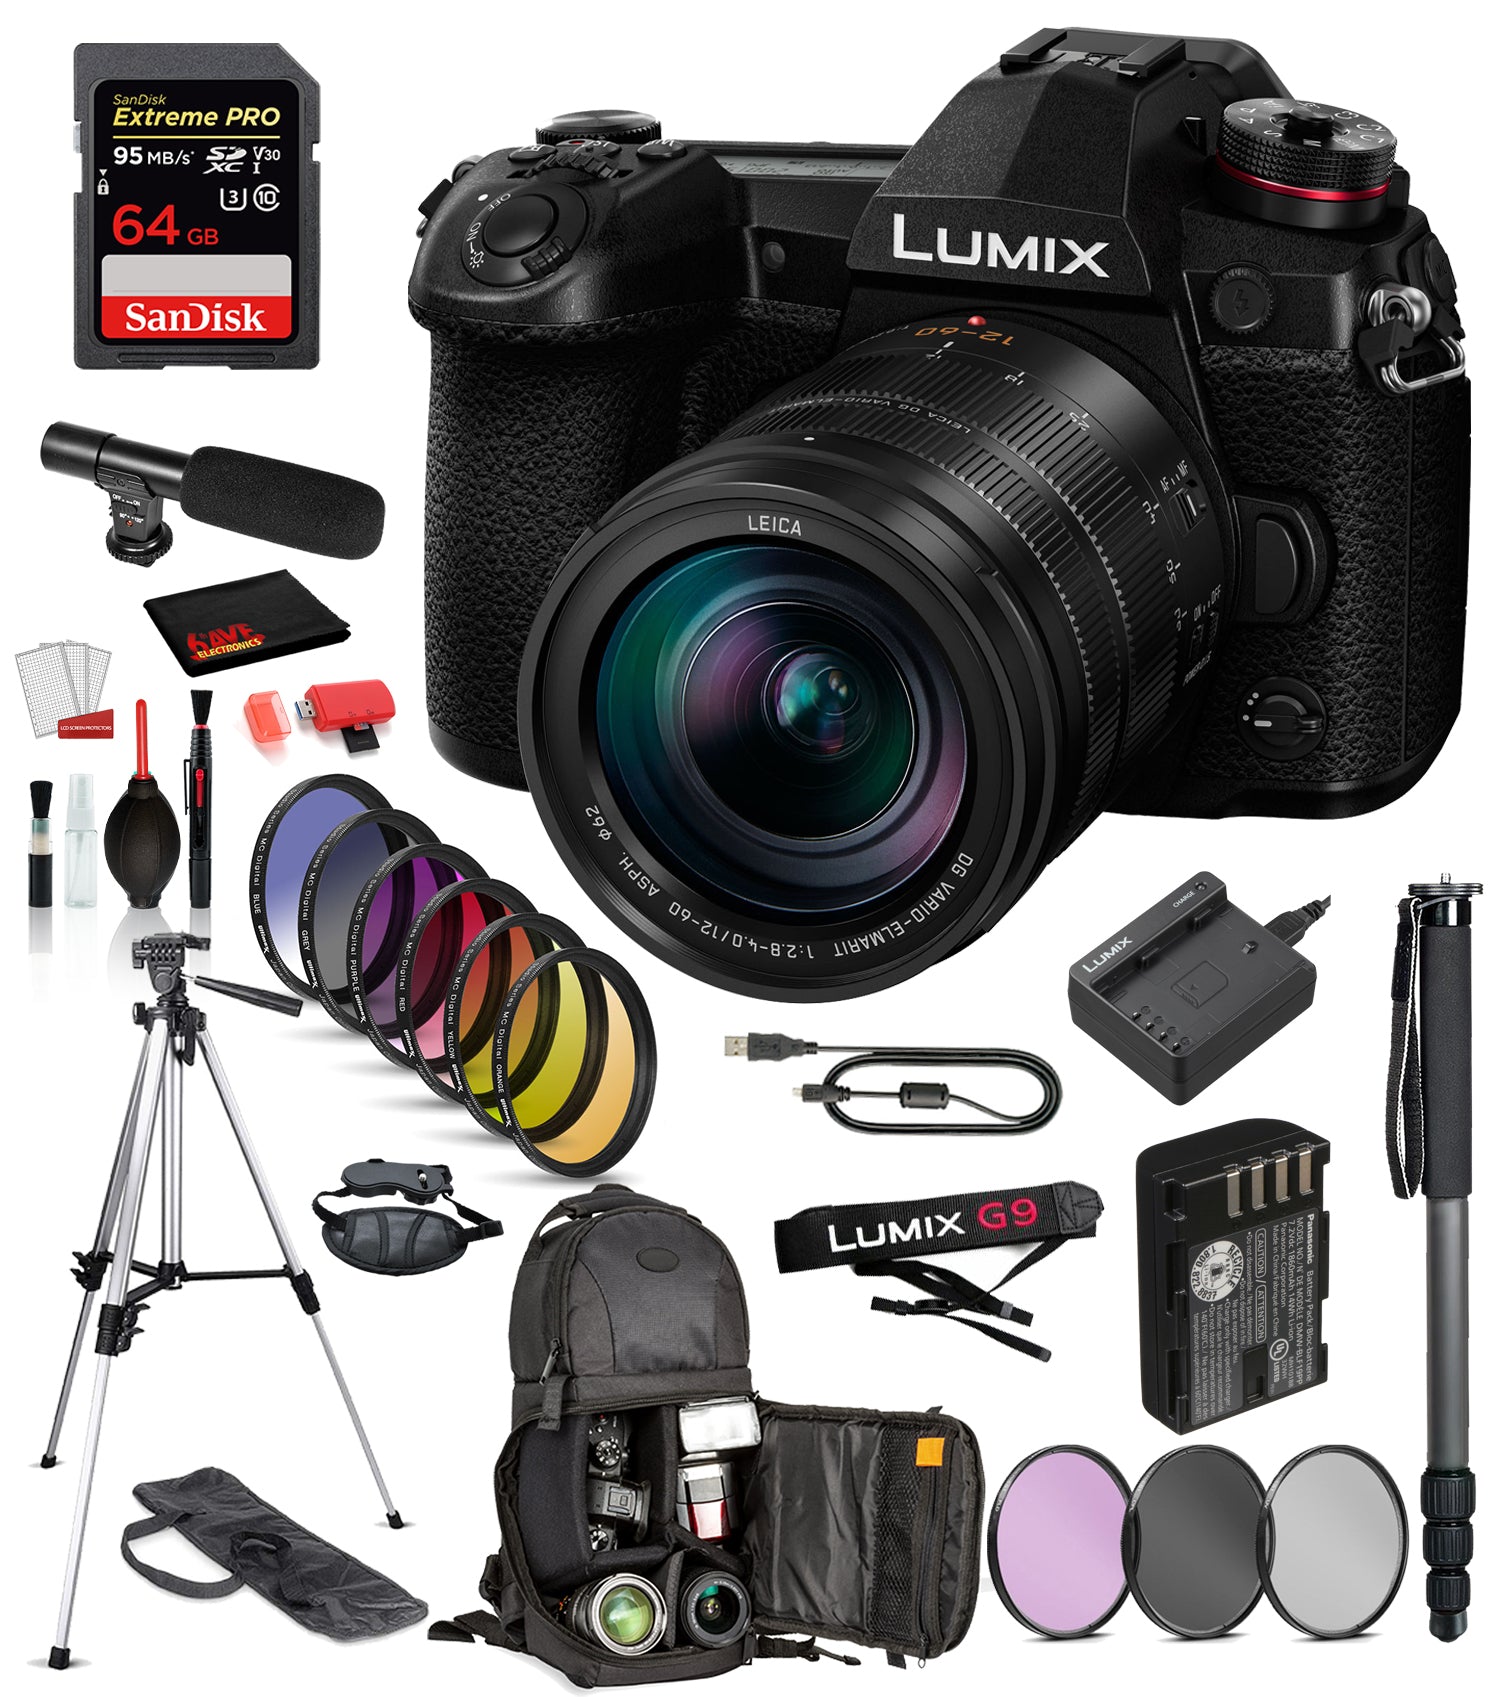 Panasonic Lumix DC-G9 Mirrorless Micro Four Thirds  Camera with 12-60mm Lens-  SanDisk extreme pro 64gb SD card + MORE